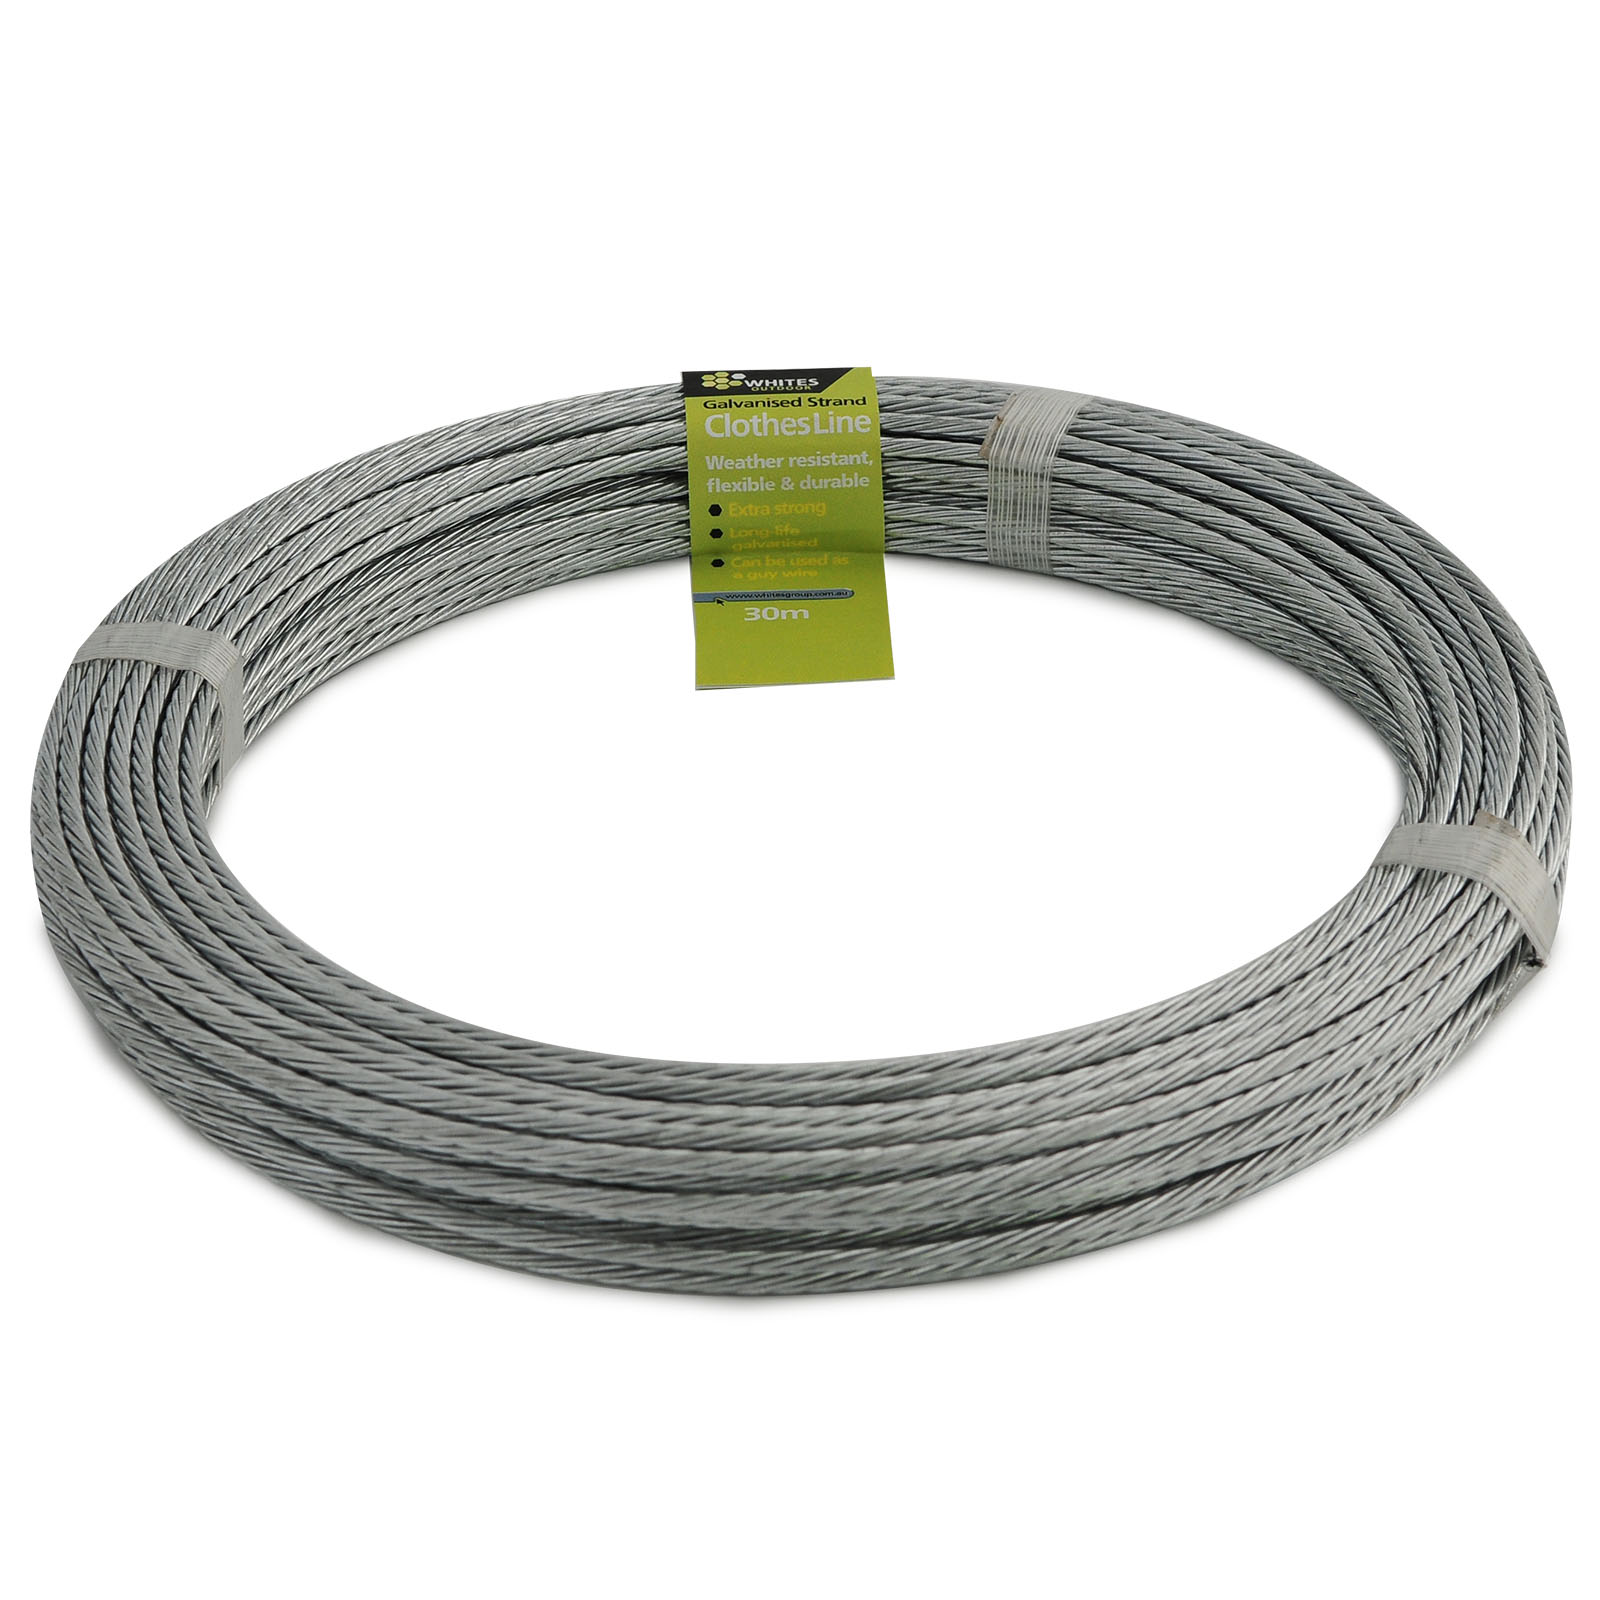 Whites Outdoor 30m Galvanised Clothesline Coil